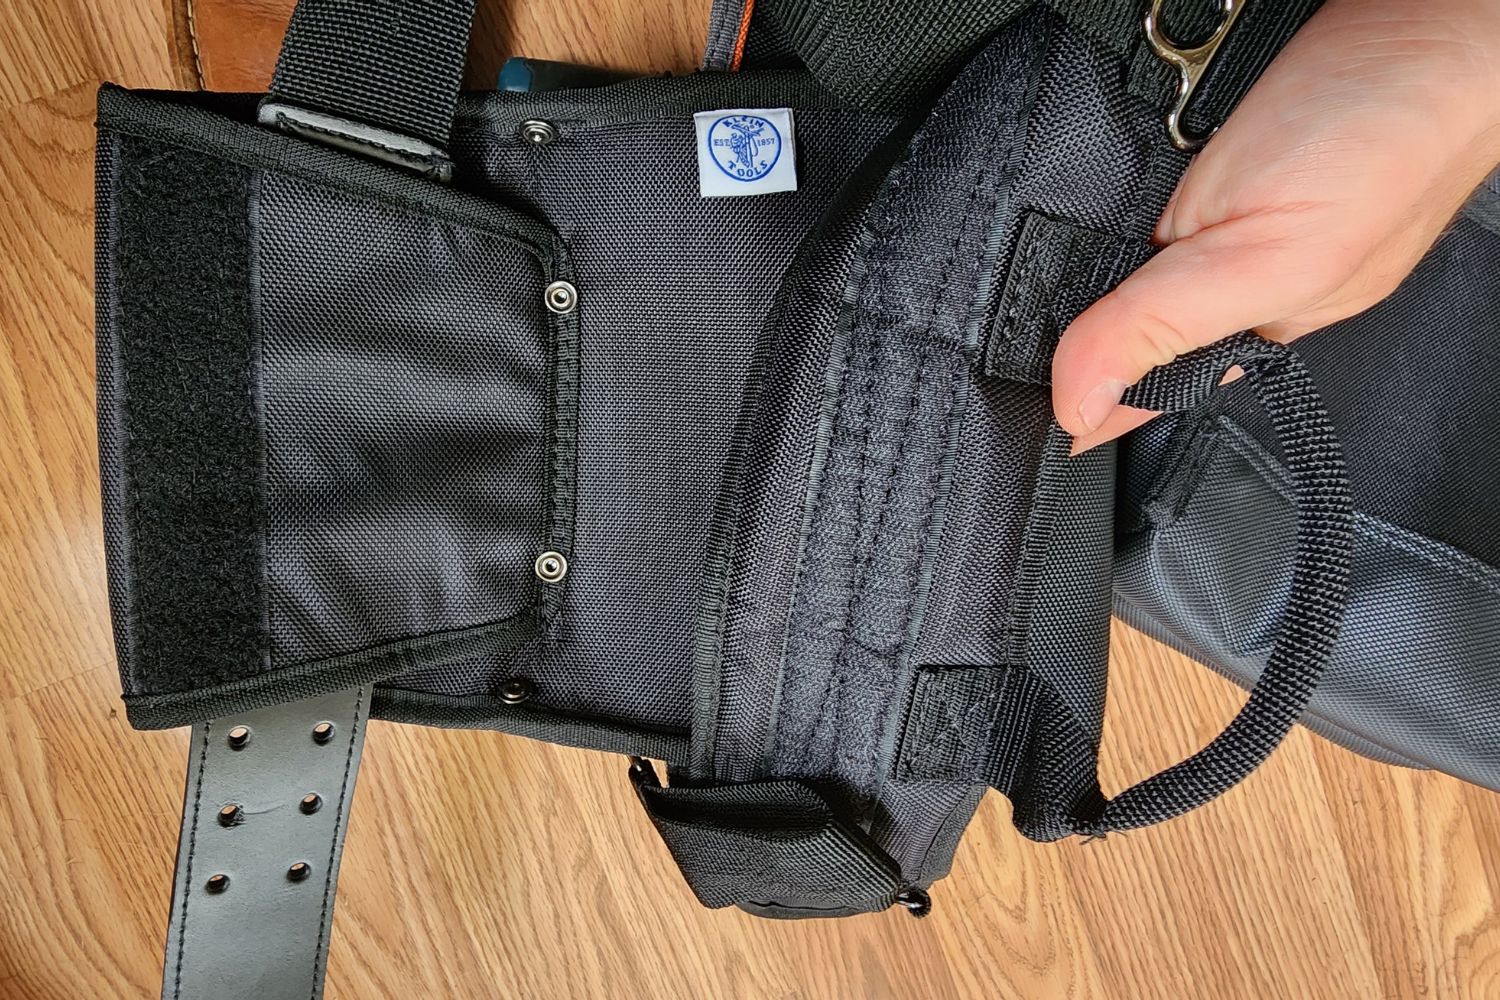 A close-up of the Klein Tools Tradesman Pro Electrician's Tool Belt